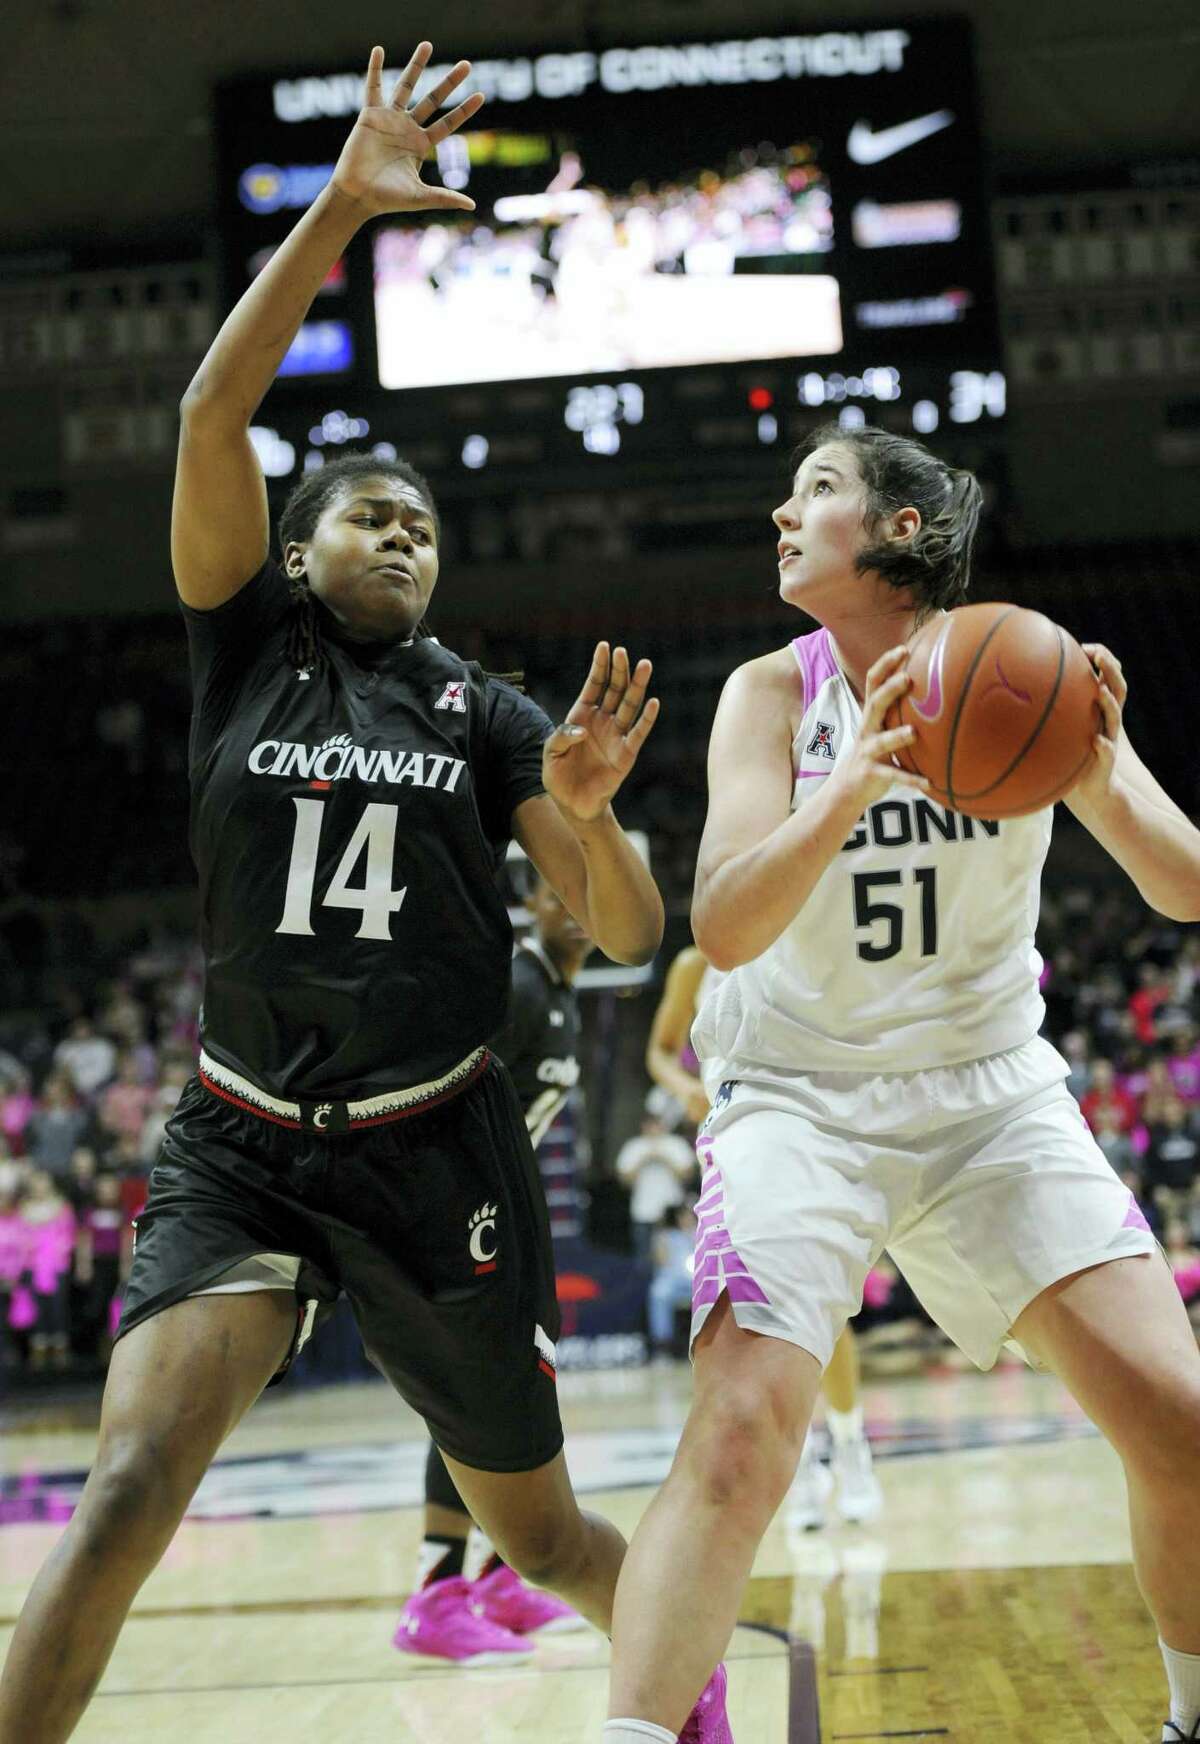 UConn’s Natalie Butler finished with a double-double in her first start with the Huskies.